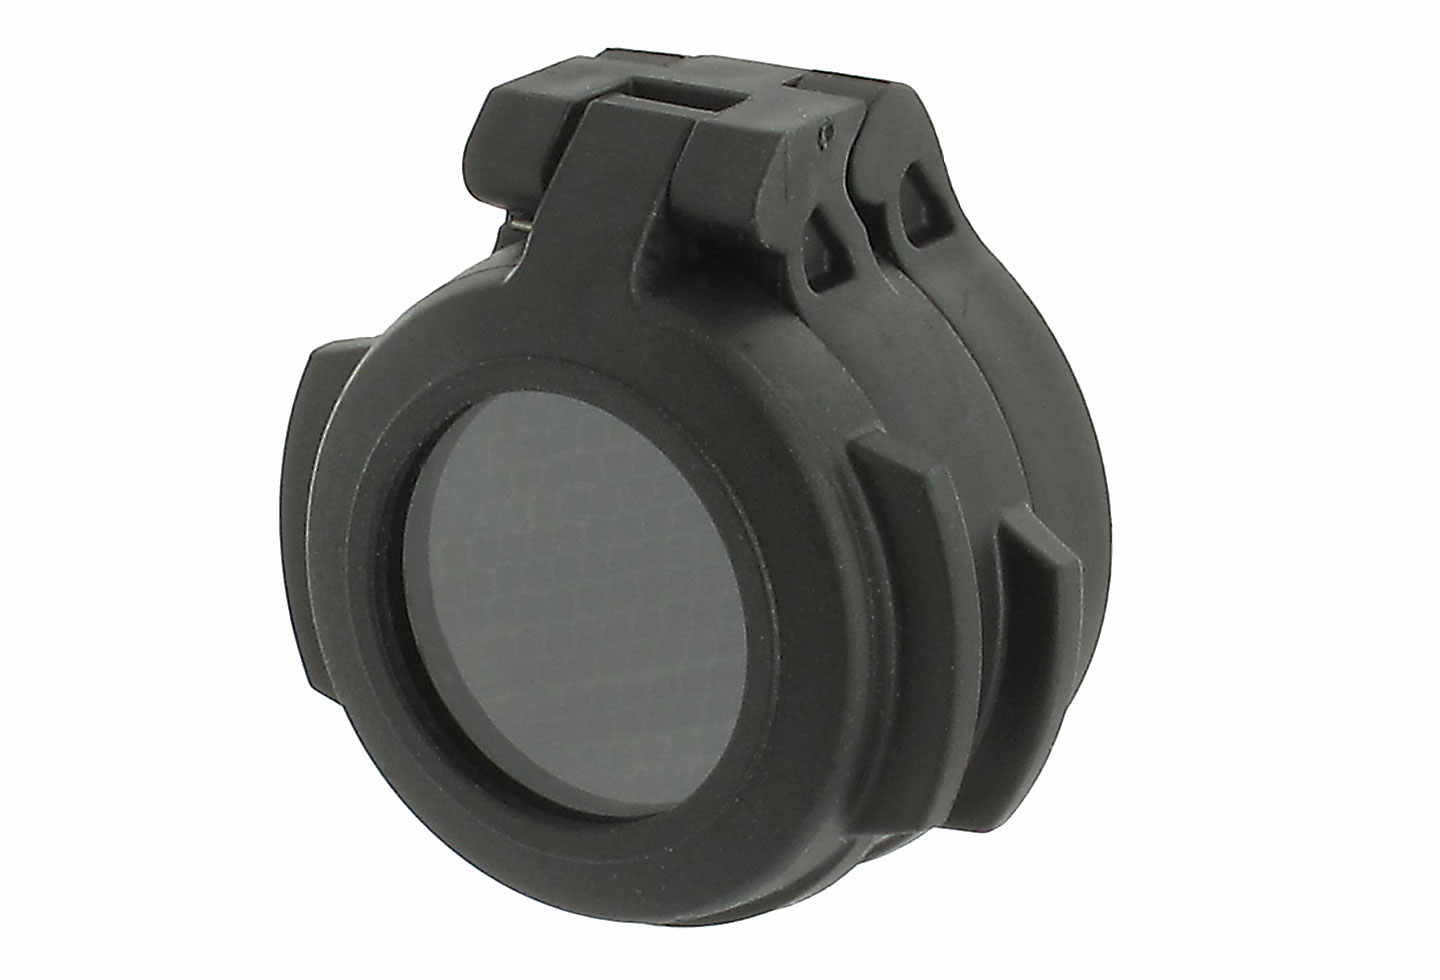 MicroT-2 / CompM5 Front Clear Lens Cover with Killflash